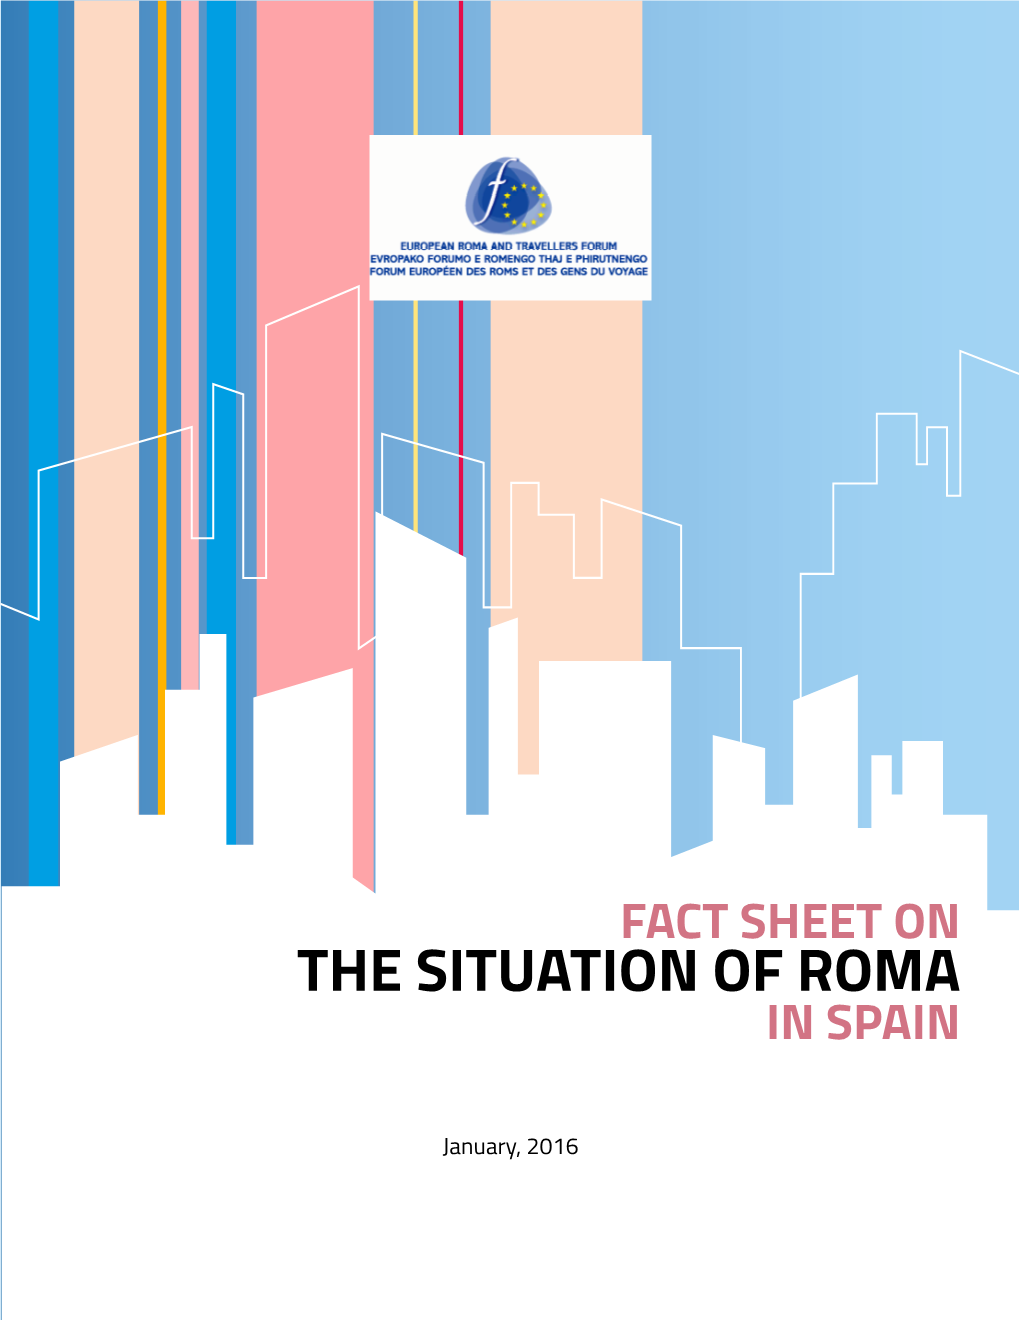 The Situation of Roma in Spain